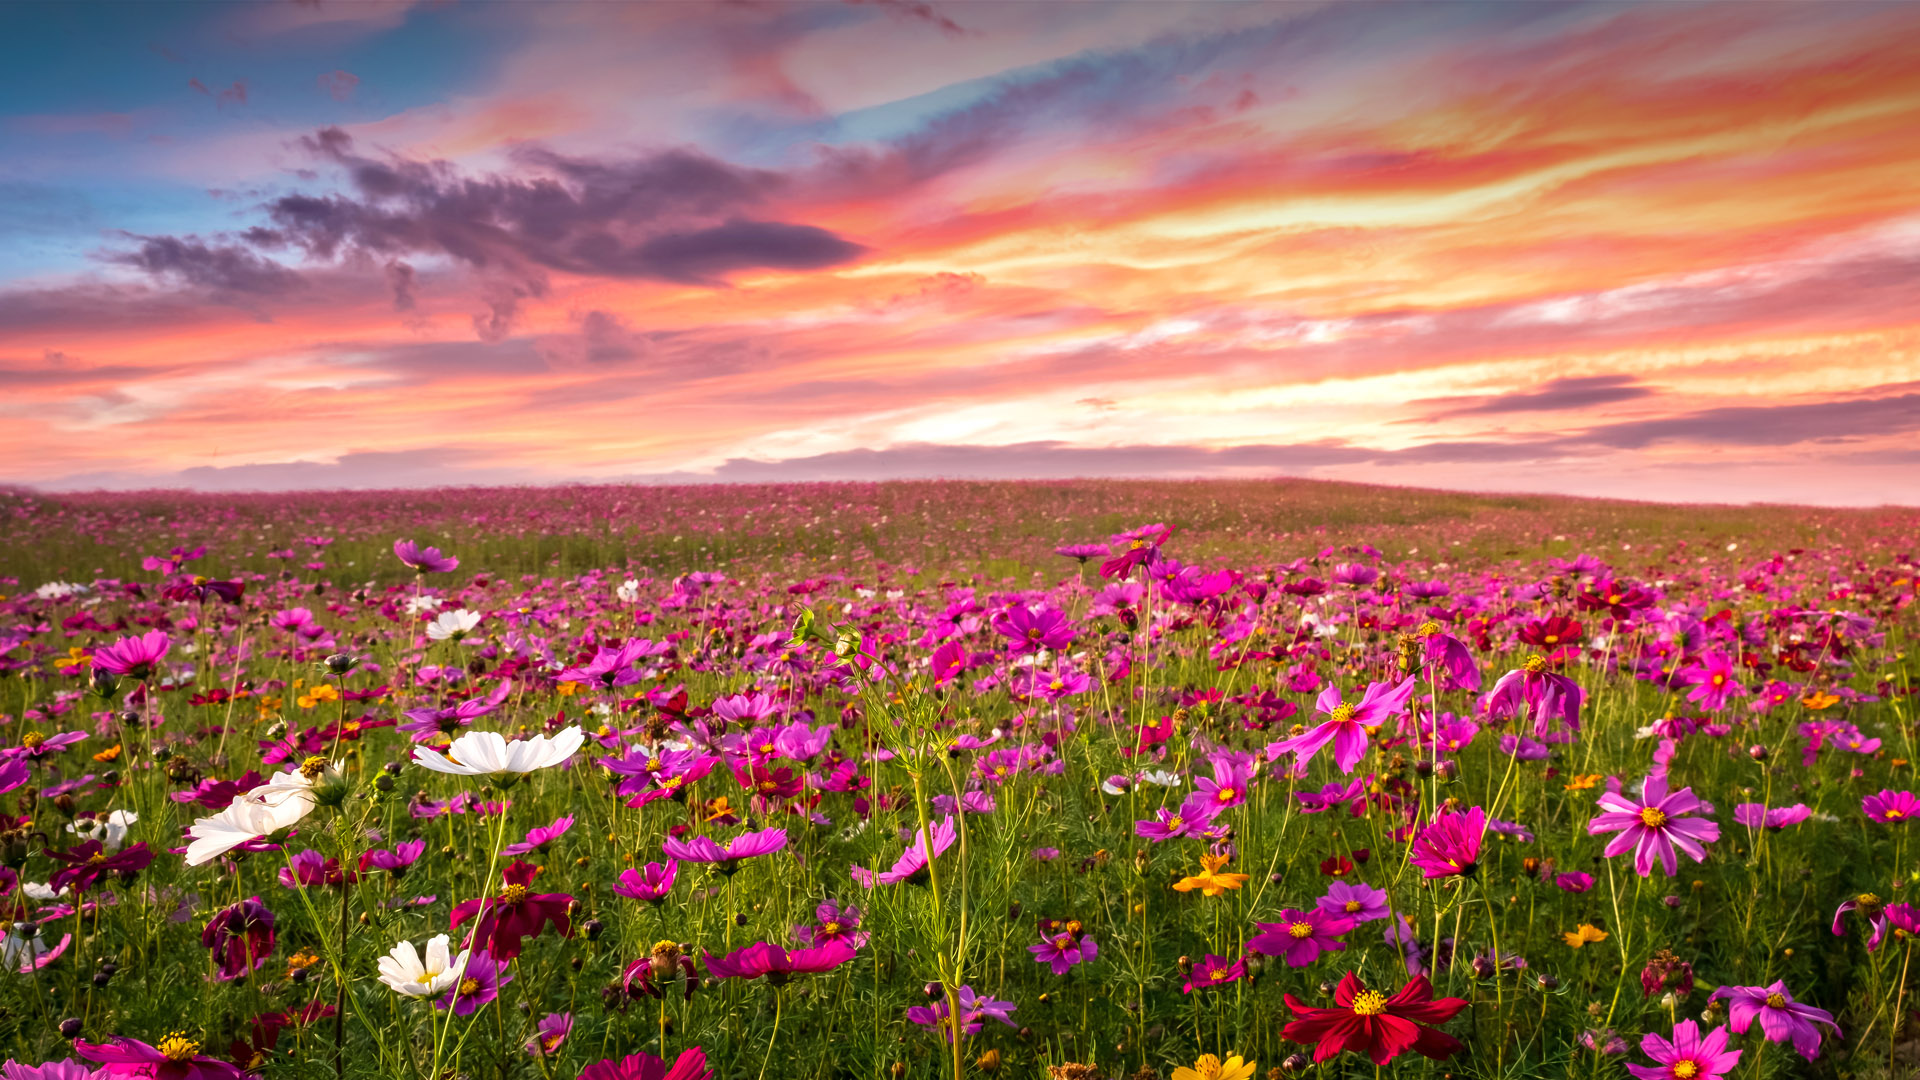 Cosmos flower field landscape at sunset